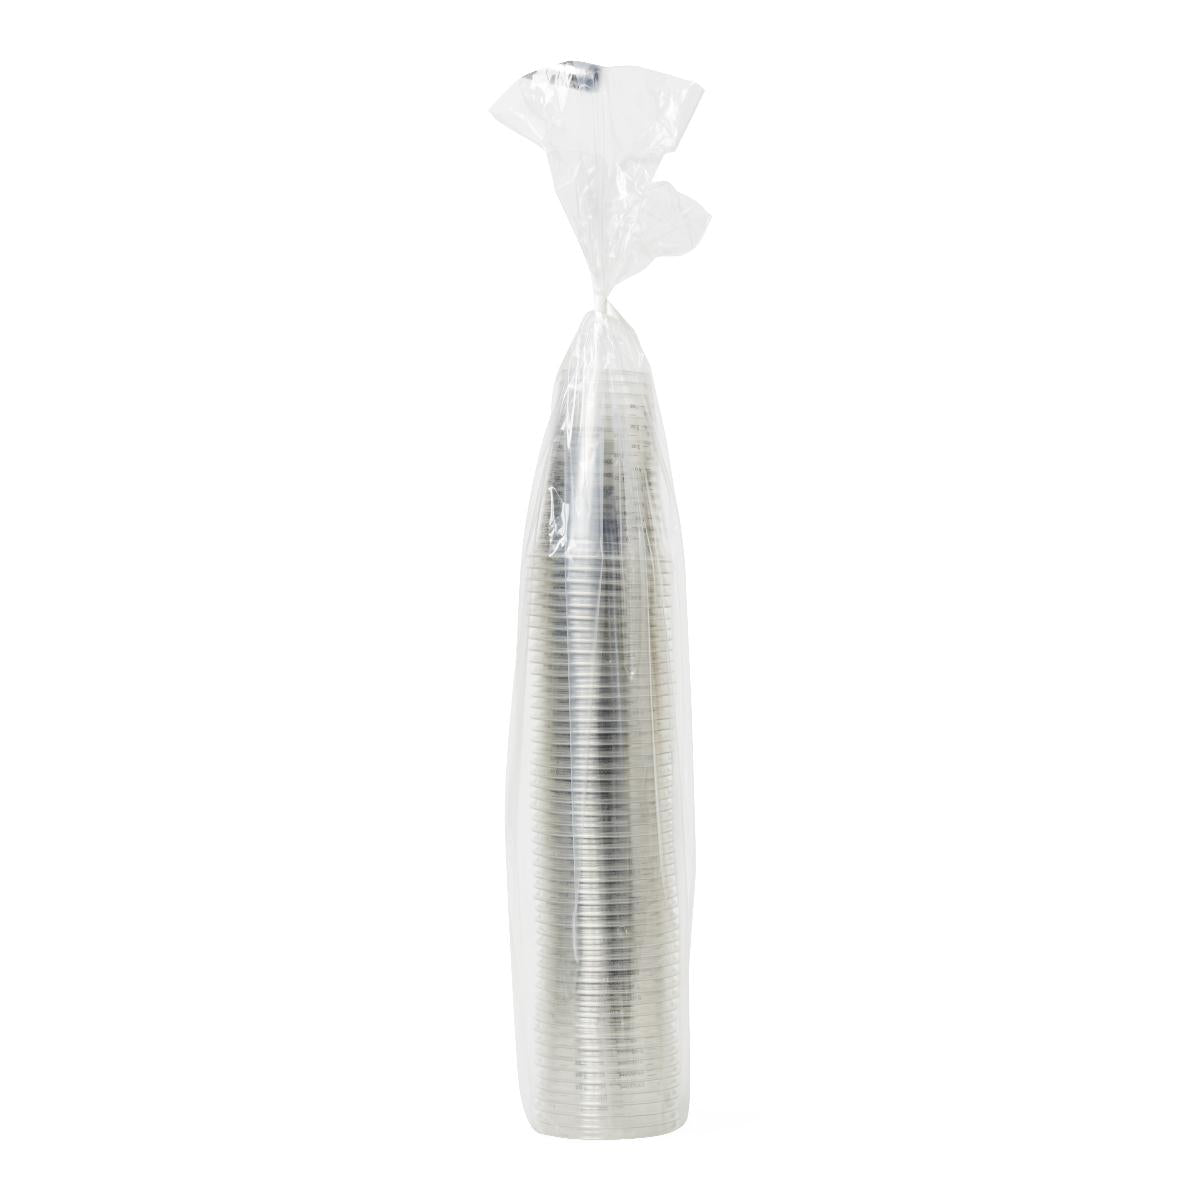 50 Each-Bag / Clear with Black Graduations / 10.000 OZ Food Service Supplies - MEDLINE - Wasatch Medical Supply